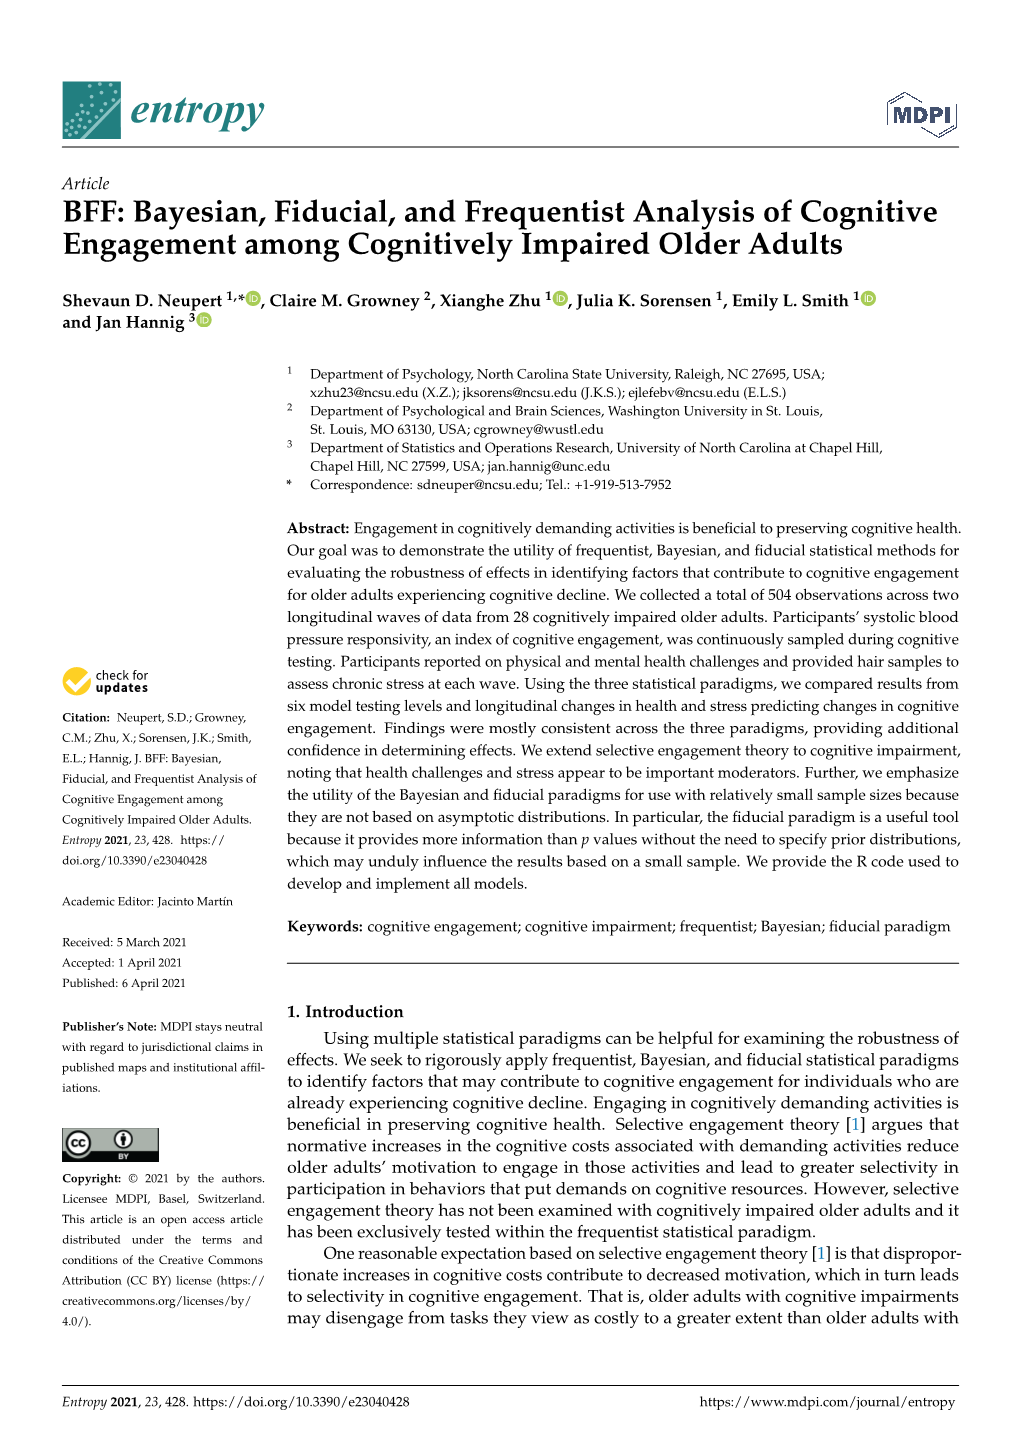 Bayesian, Fiducial, and Frequentist Analysis of Cognitive Engagement Among Cognitively Impaired Older Adults